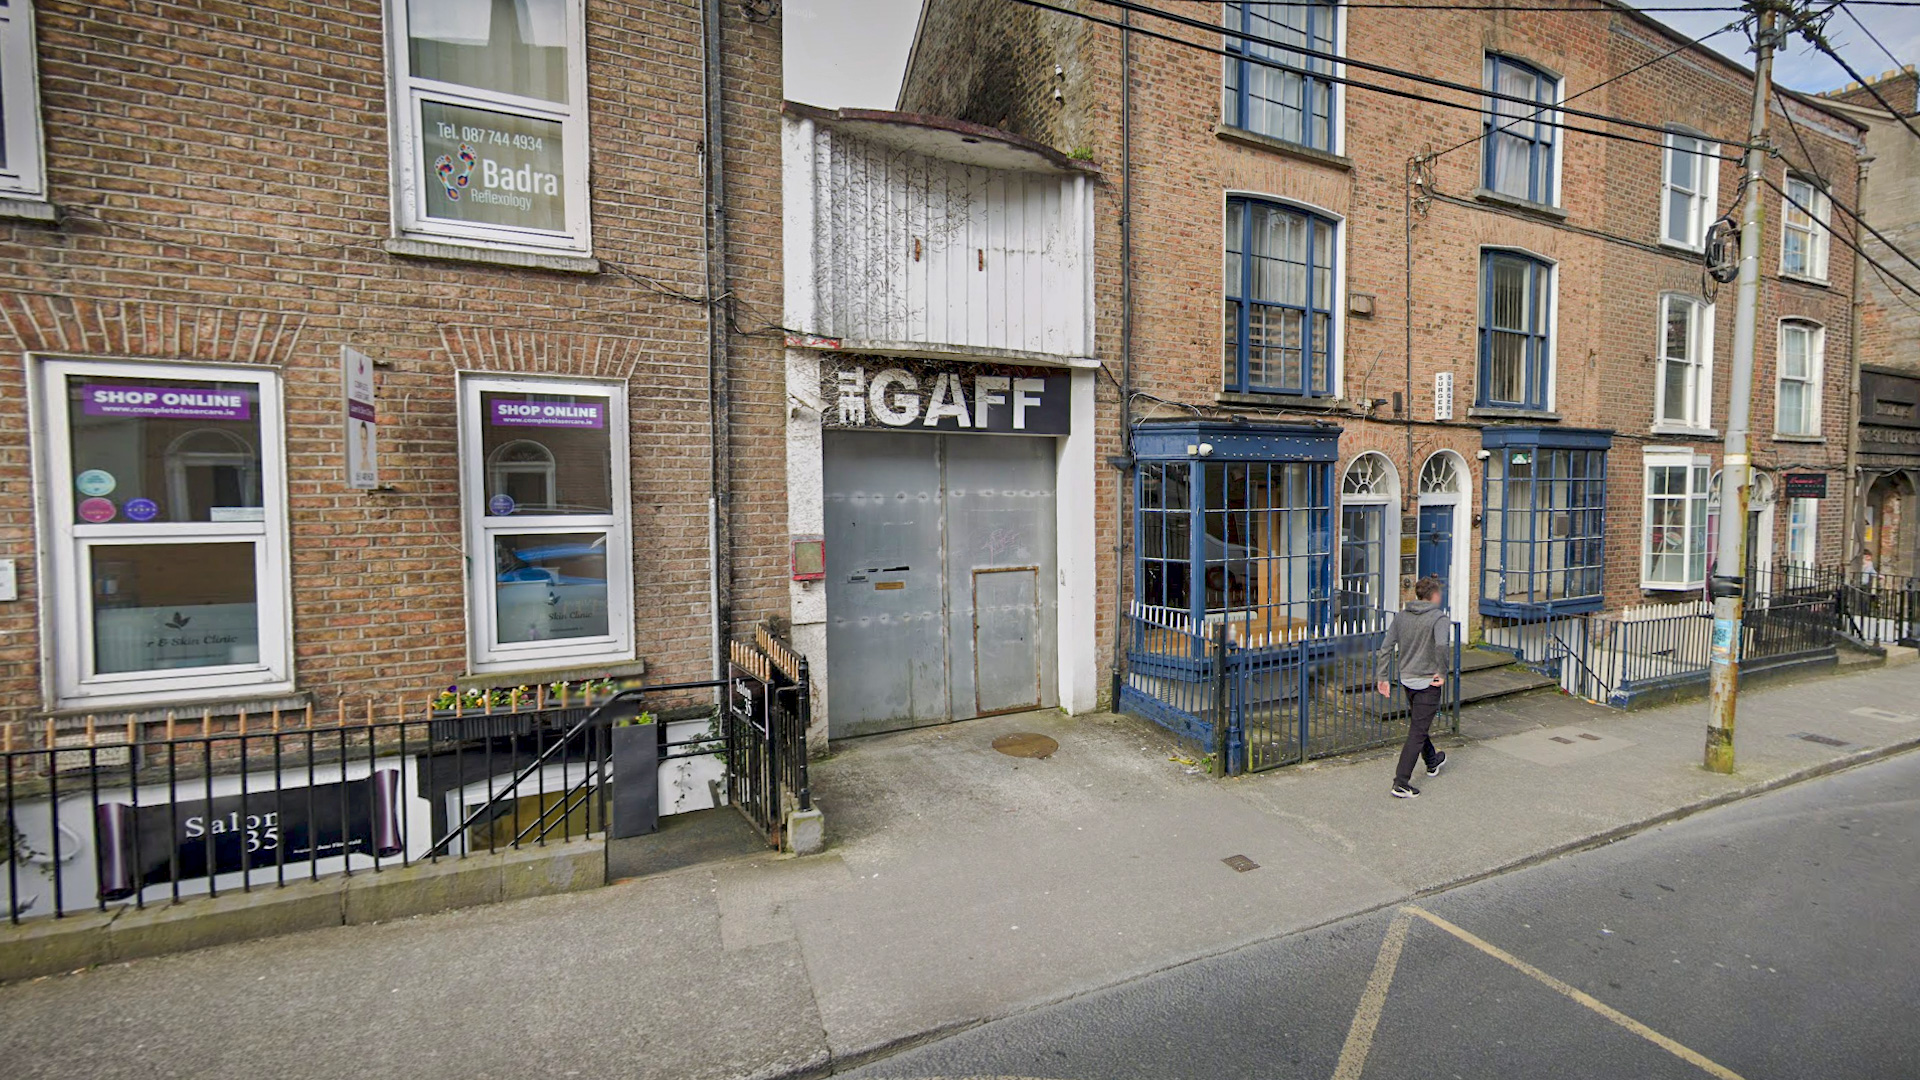 The Gaff is a thriving hub for community and performing arts in Limerick